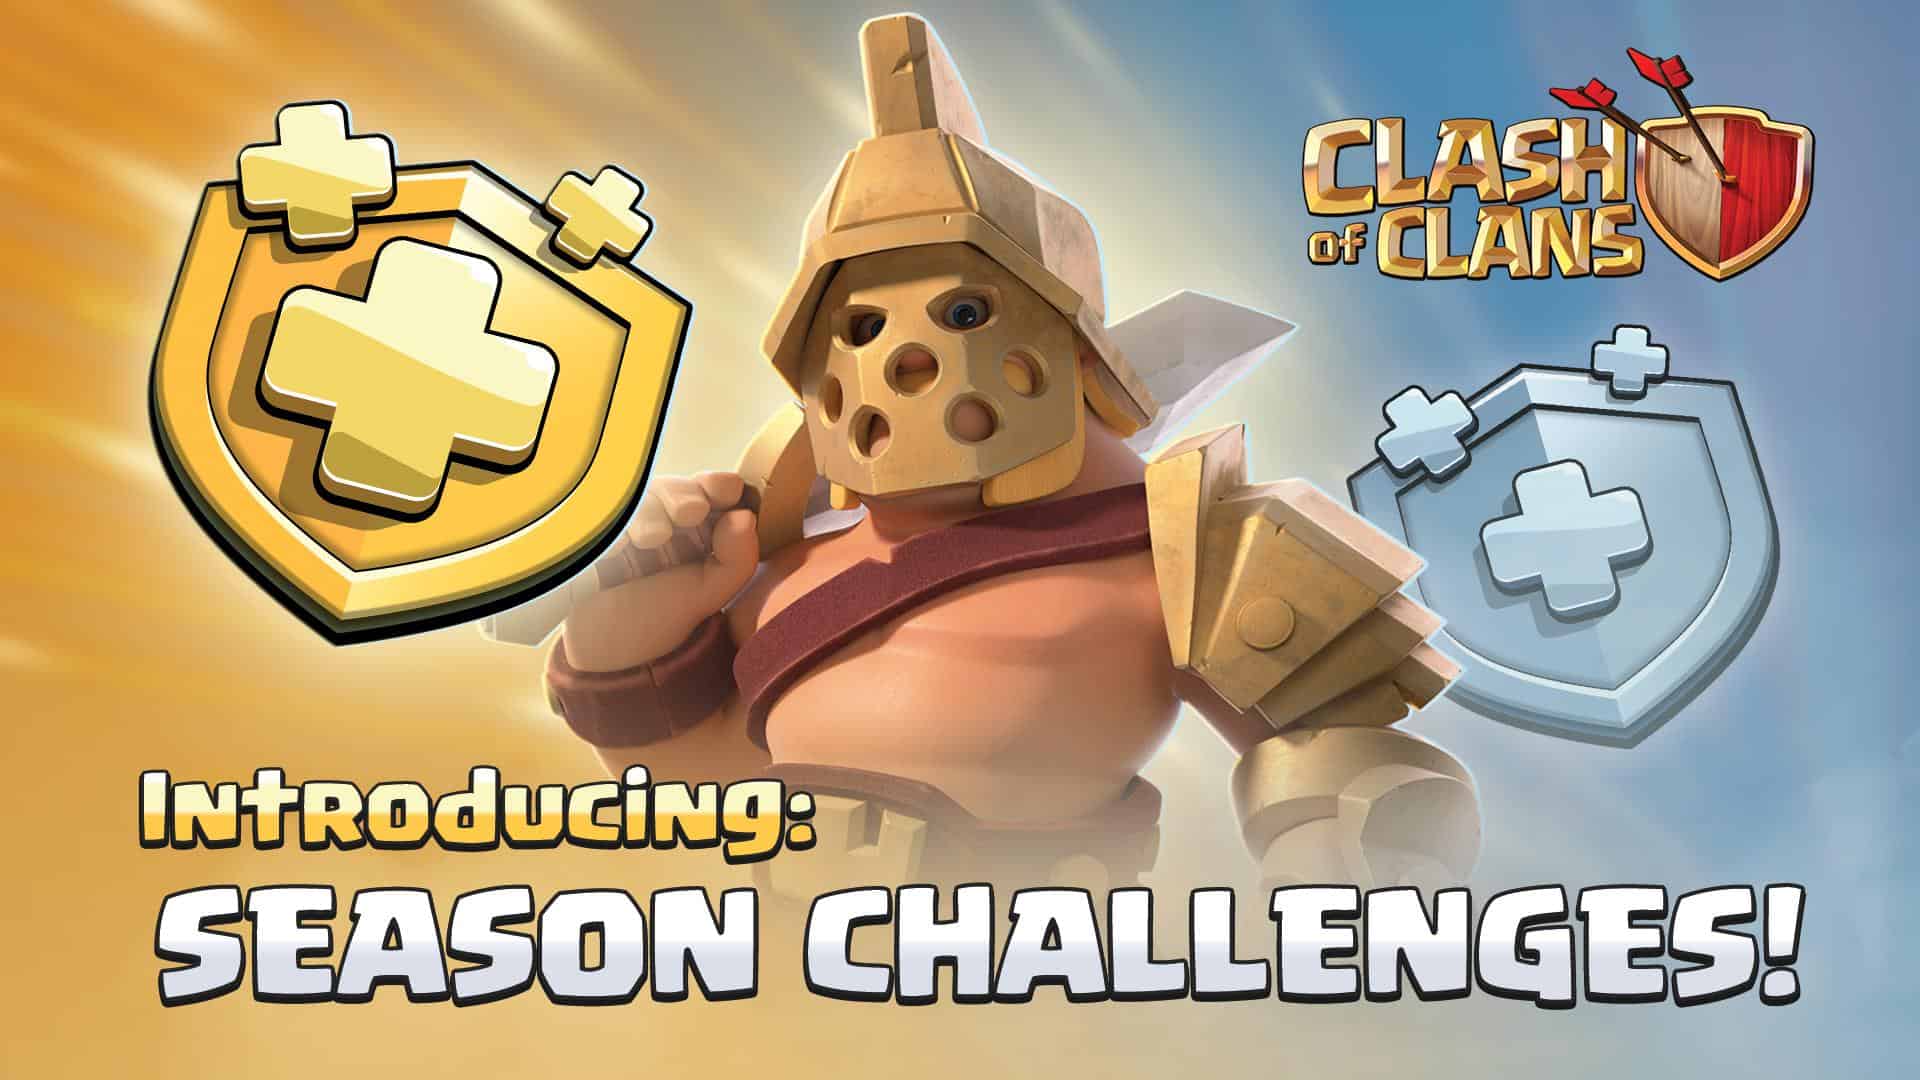 Clash of Clans Season Challenges FAQ: How to Get the Gold Pass, What are Hero Skins, and How Does the Season Bank Work?